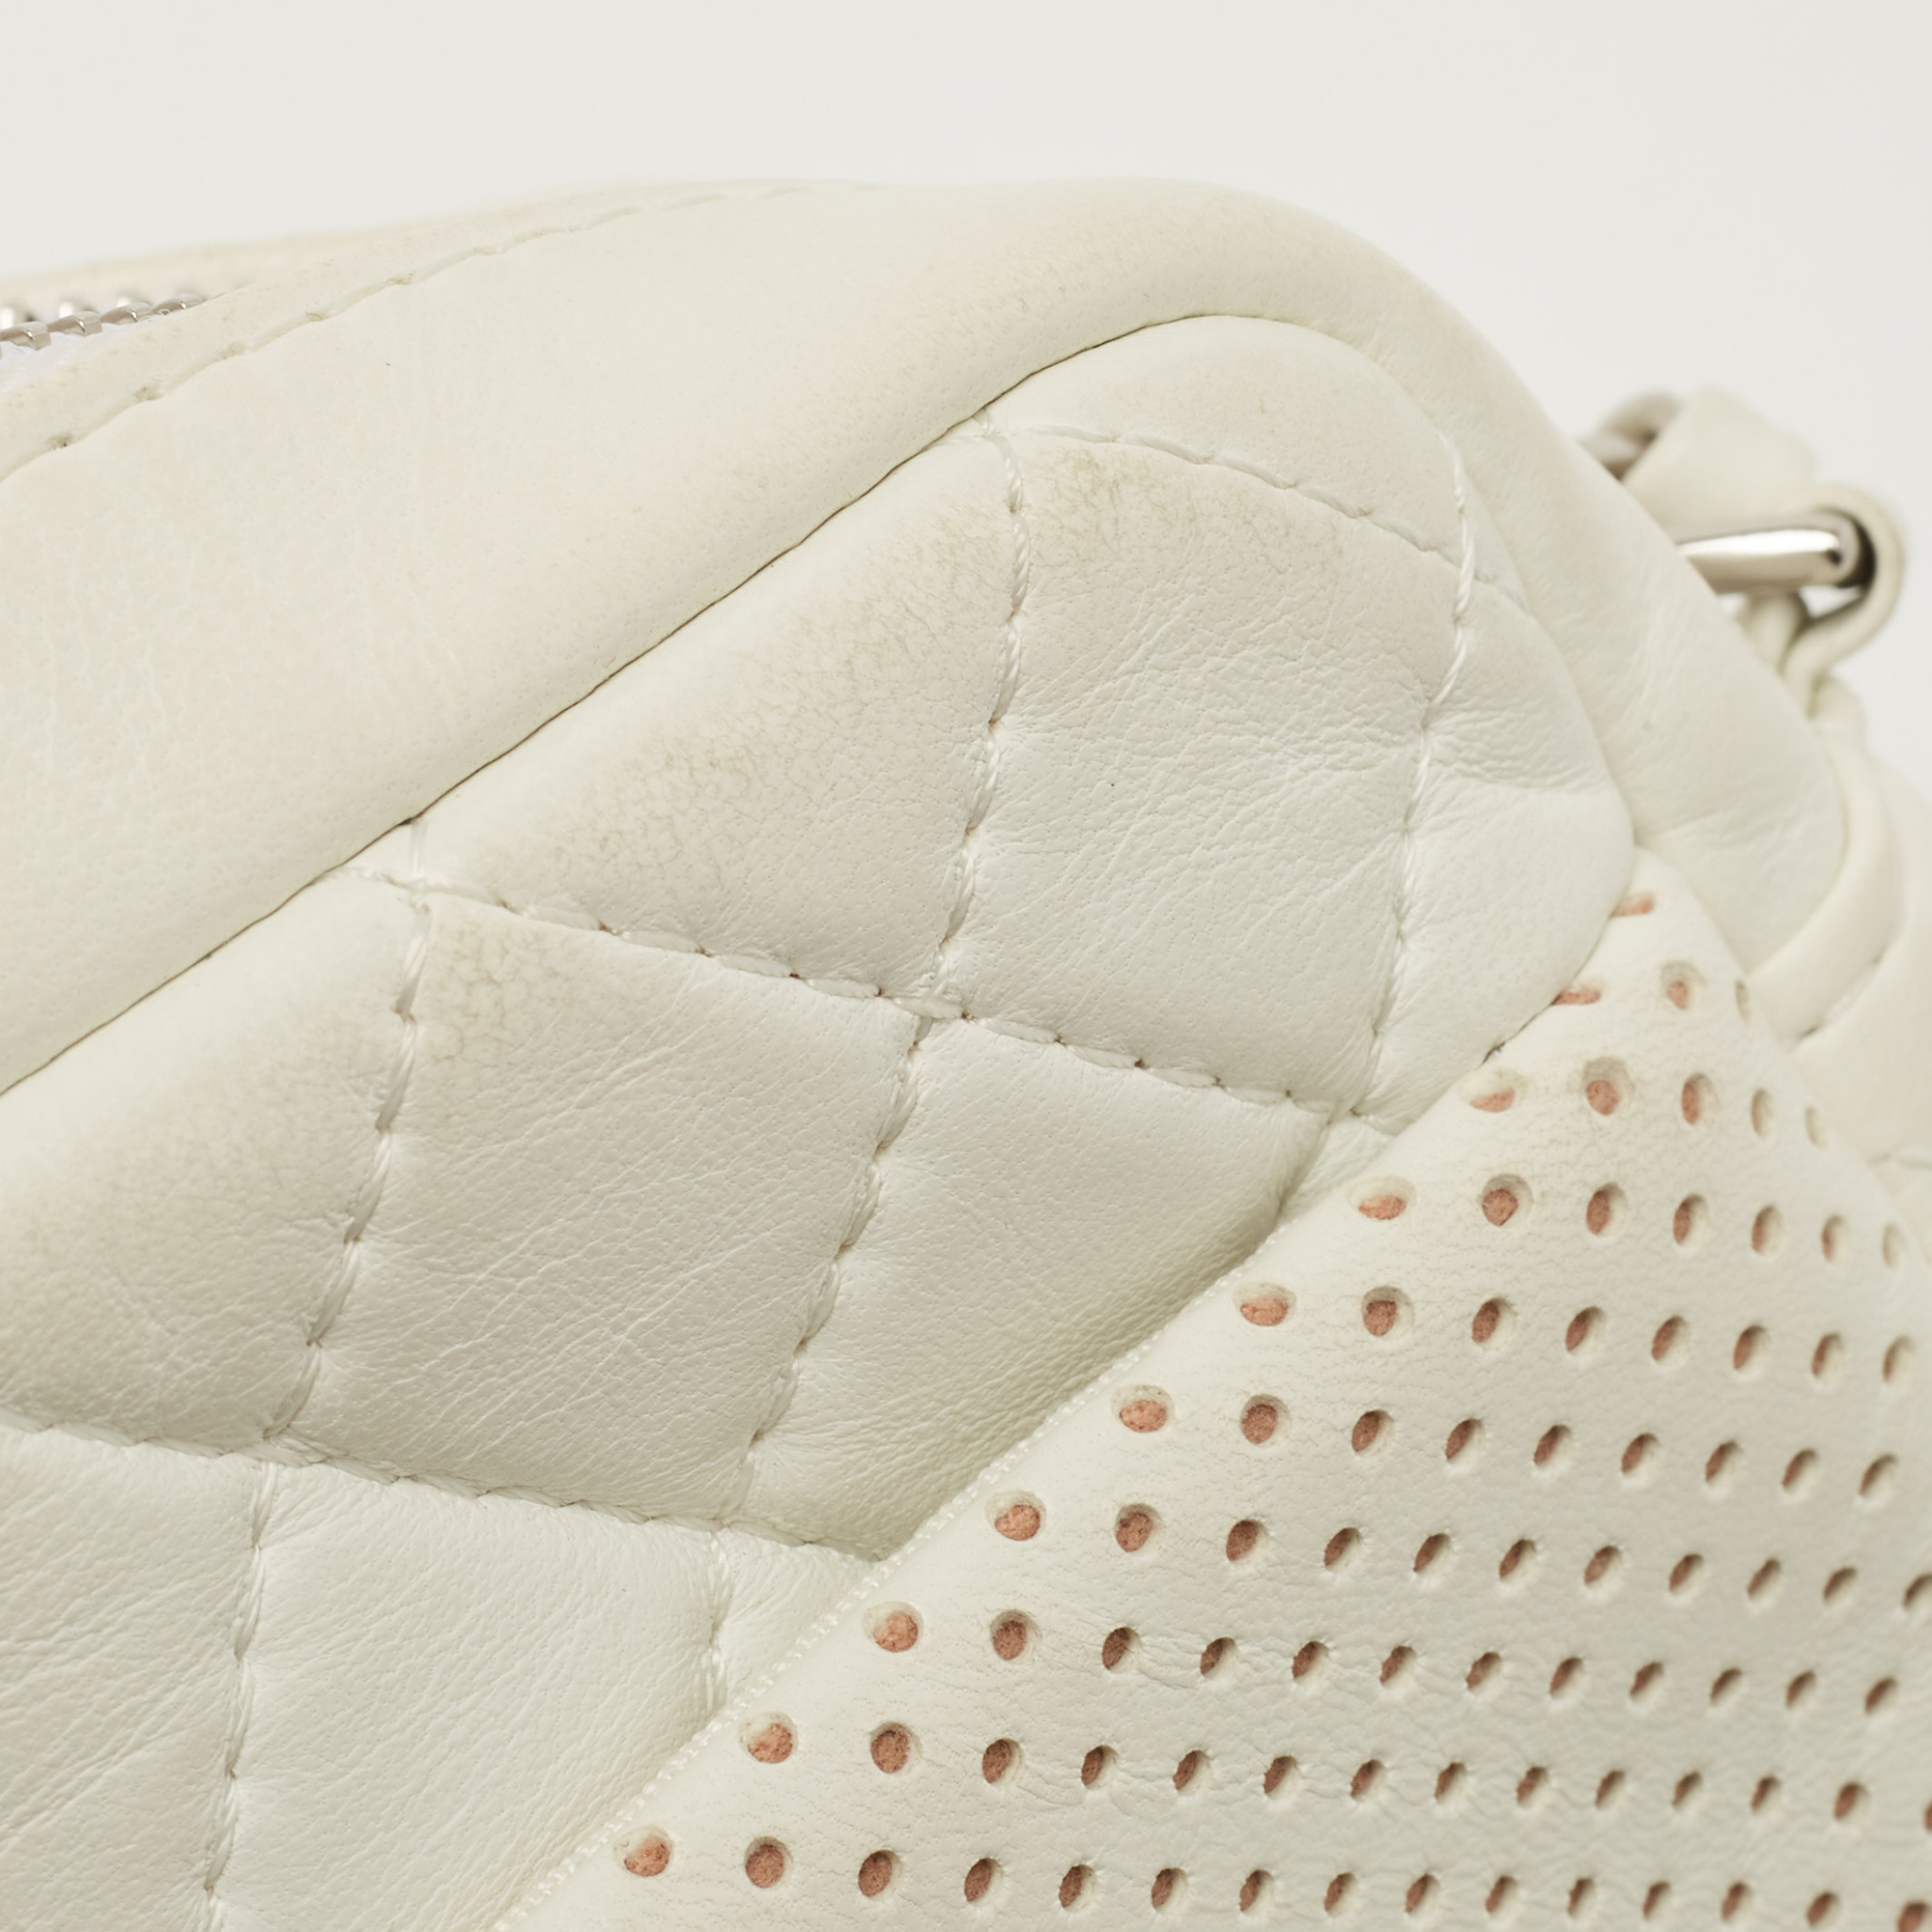 Chanel White Perforated Leather Ultra Pocket Camera Bag